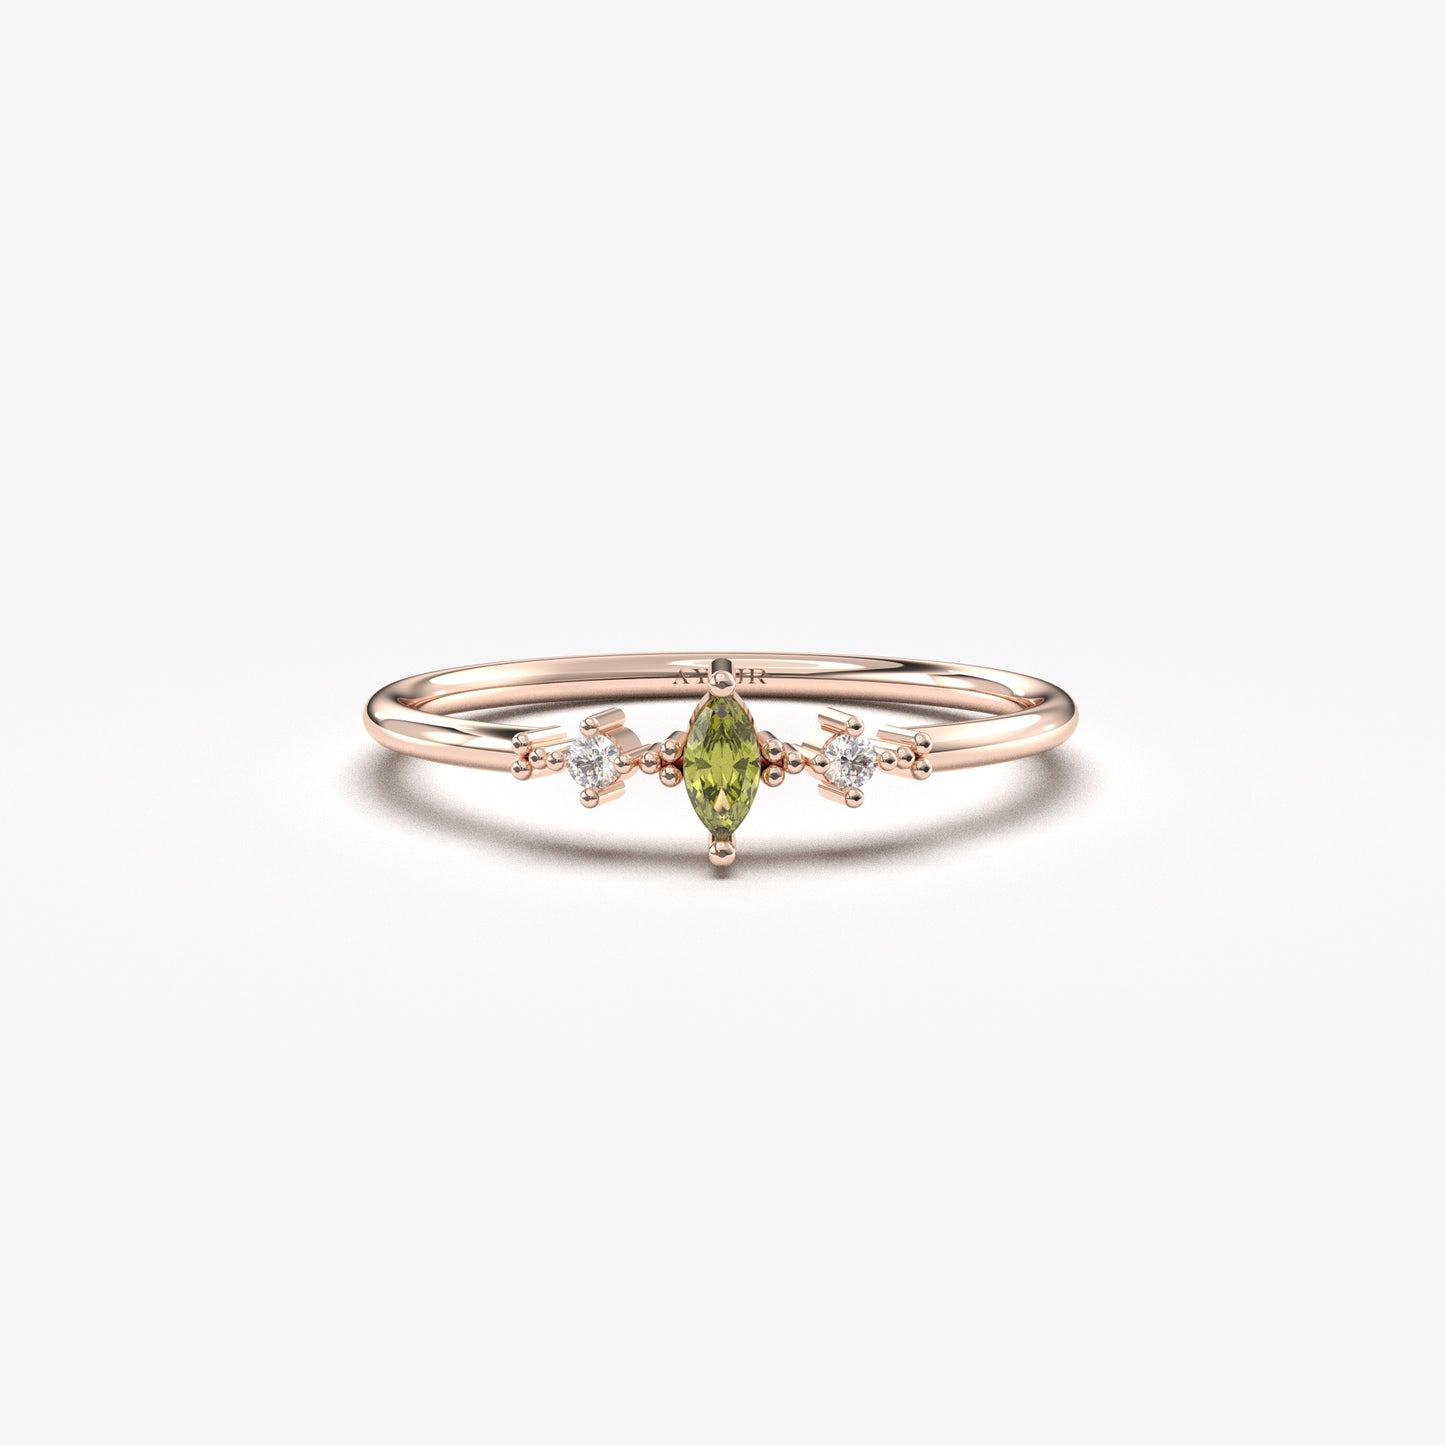 10K Gold Marquise Peridot Ring - 2S111P